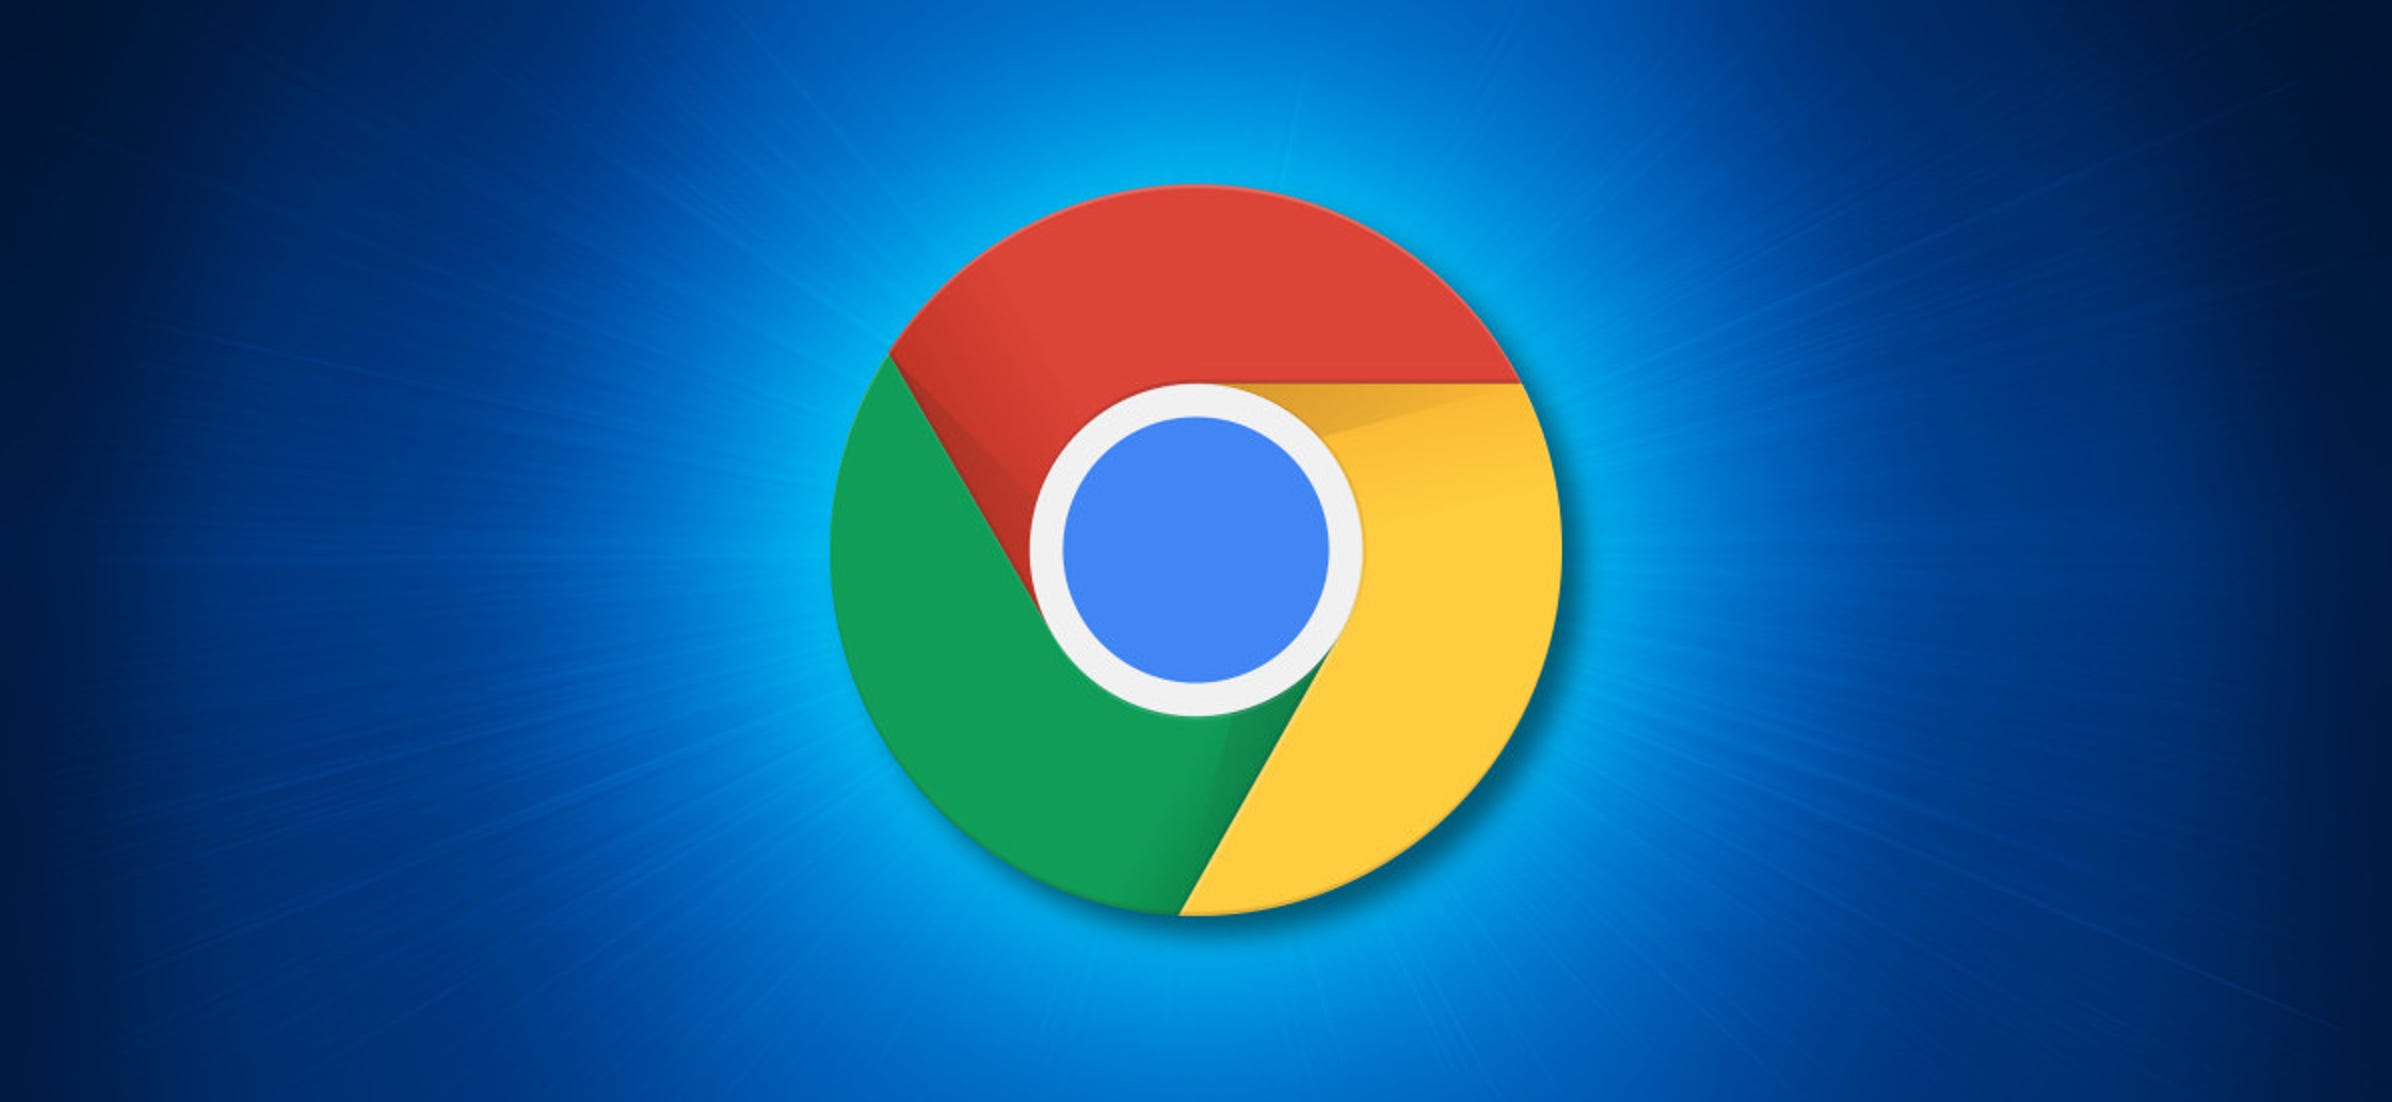 How to Automatically Change Google Chrome's New Tab Background